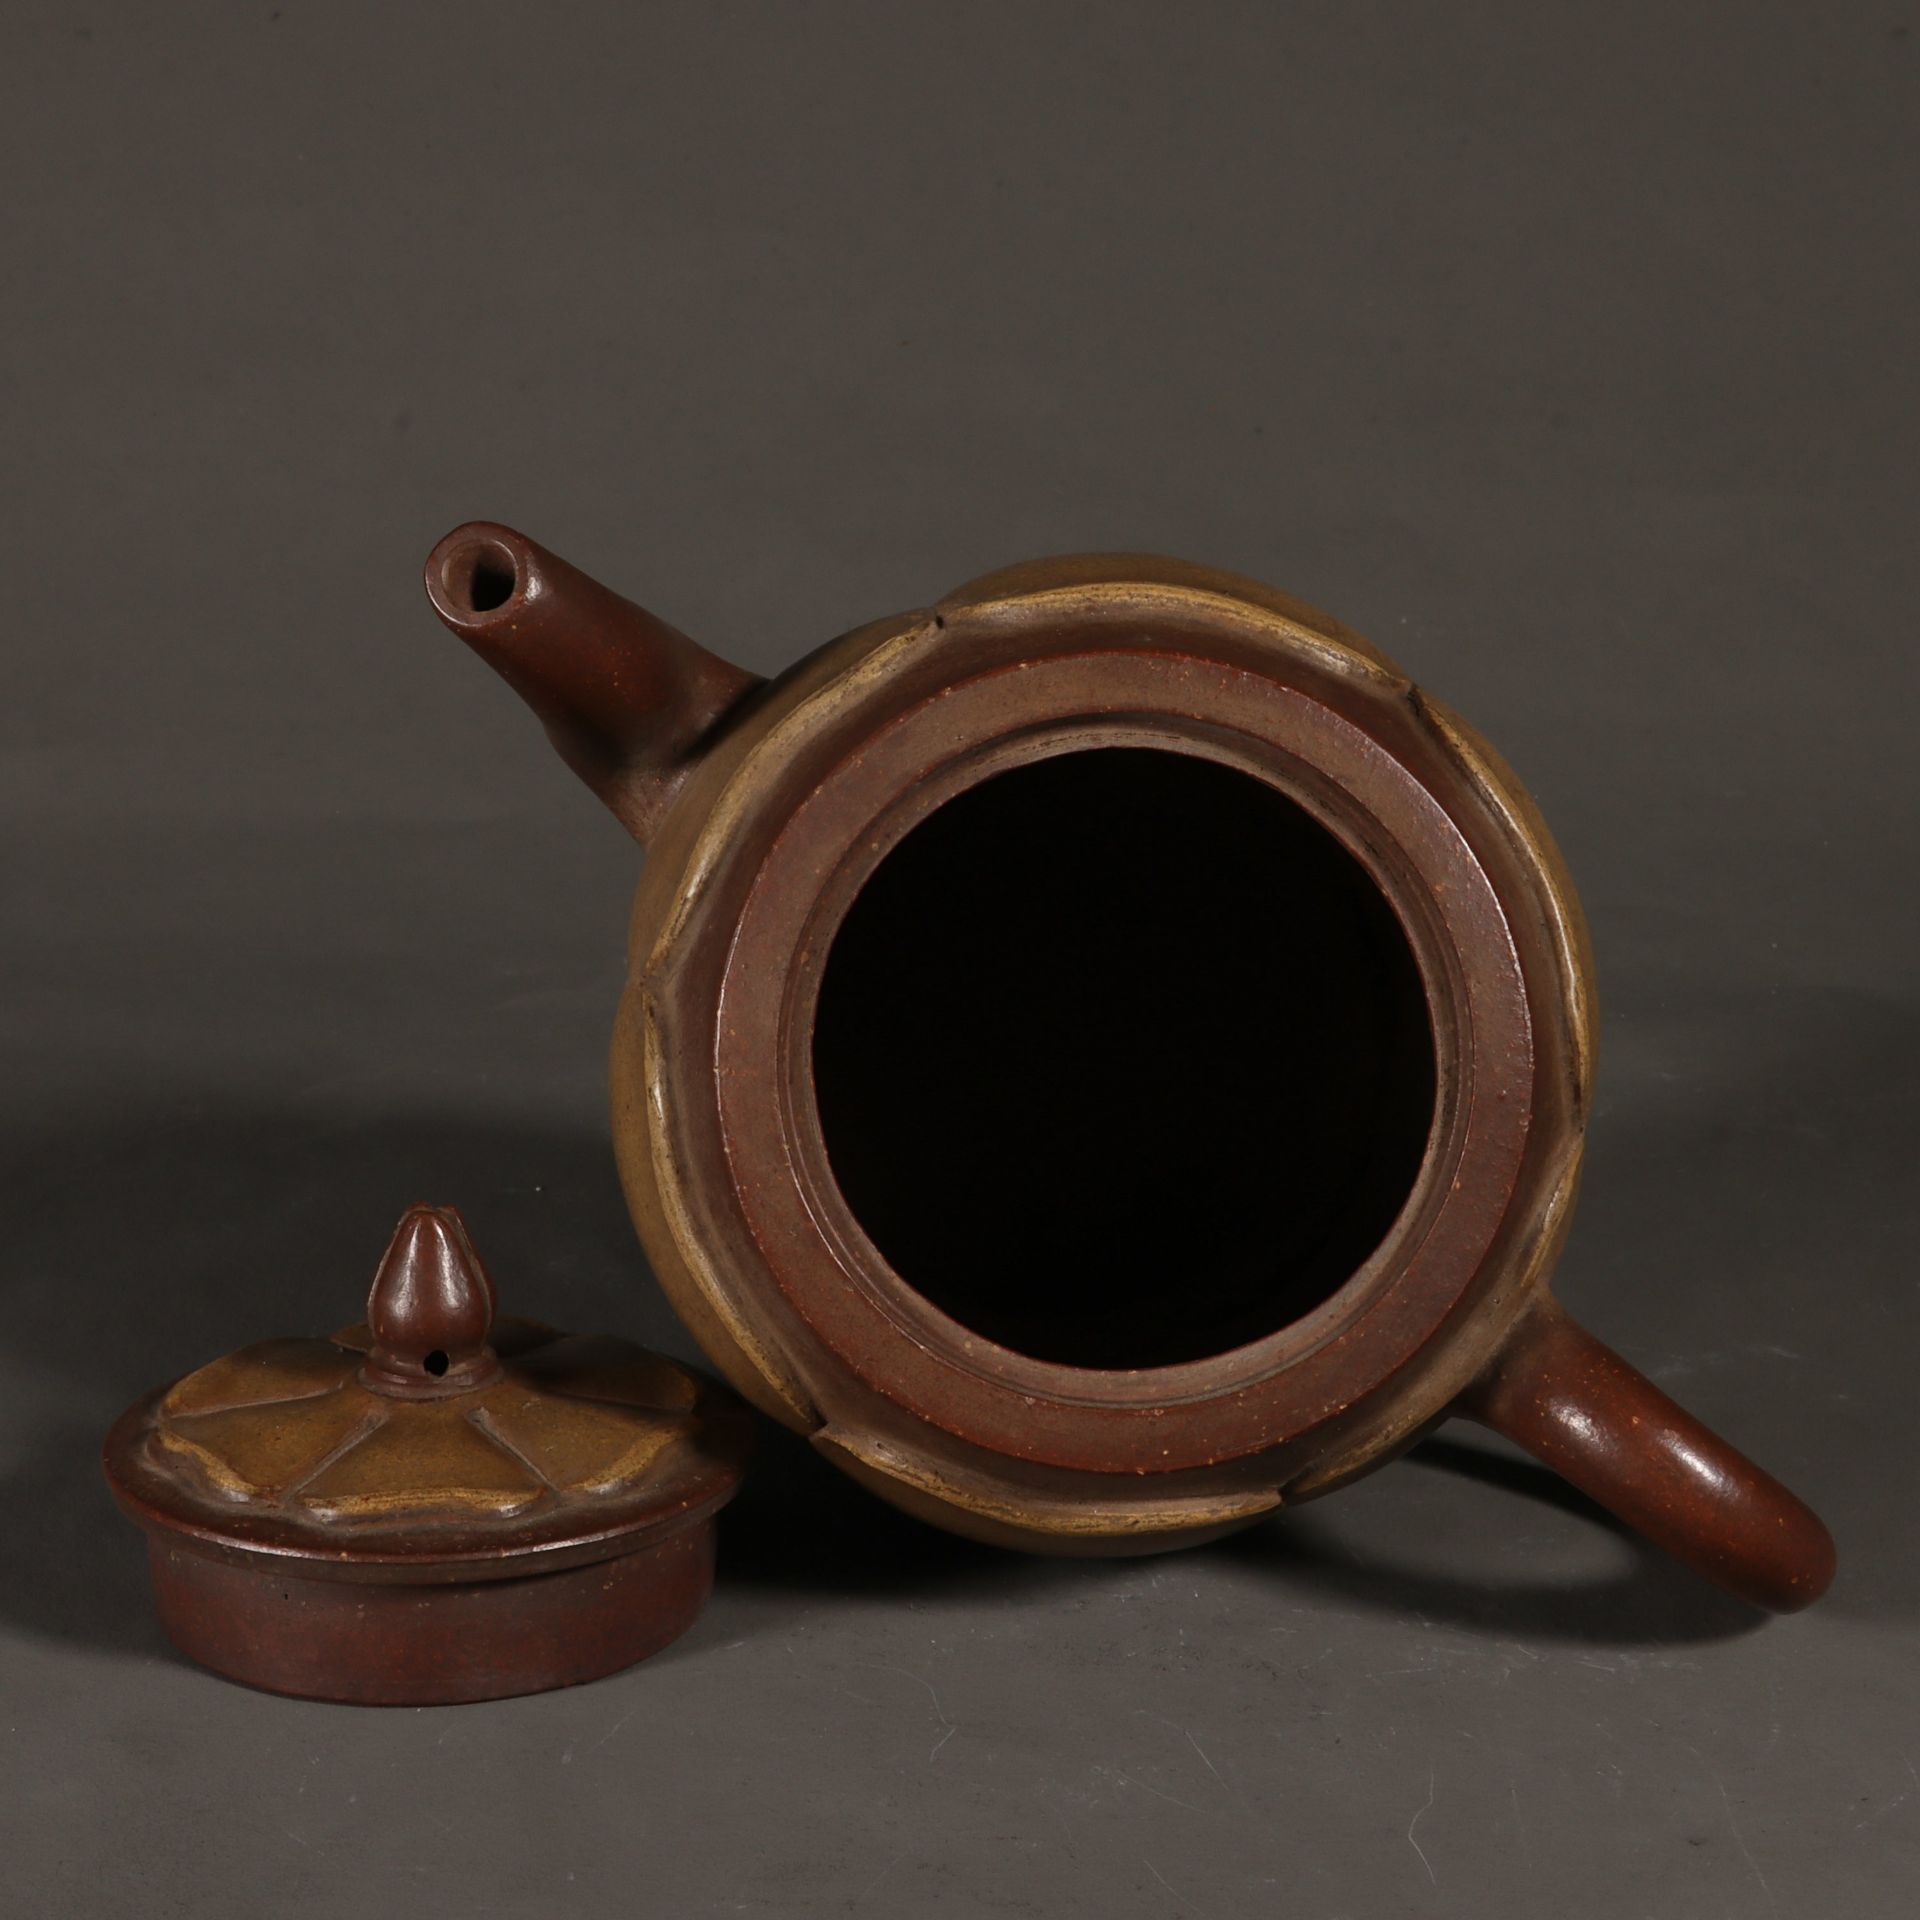 Purple clay pot from the Qing Dynasty - Image 8 of 9